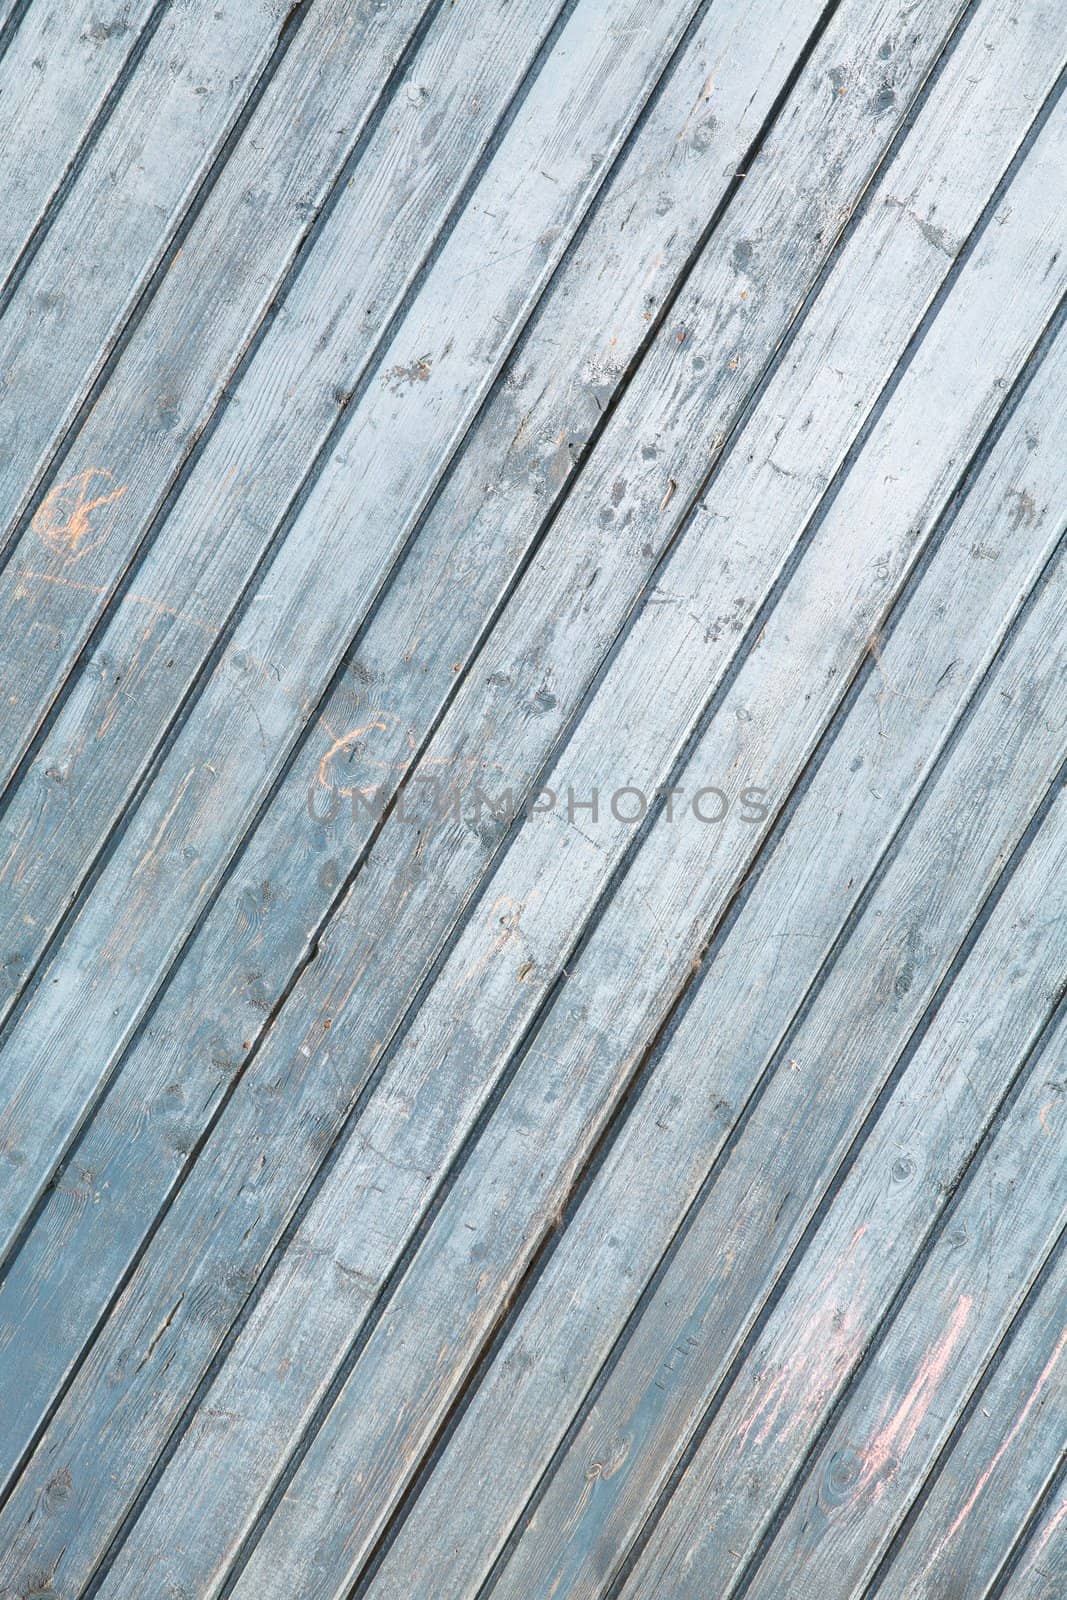 Texture, Surface of the Old Dyed Boards, Bands